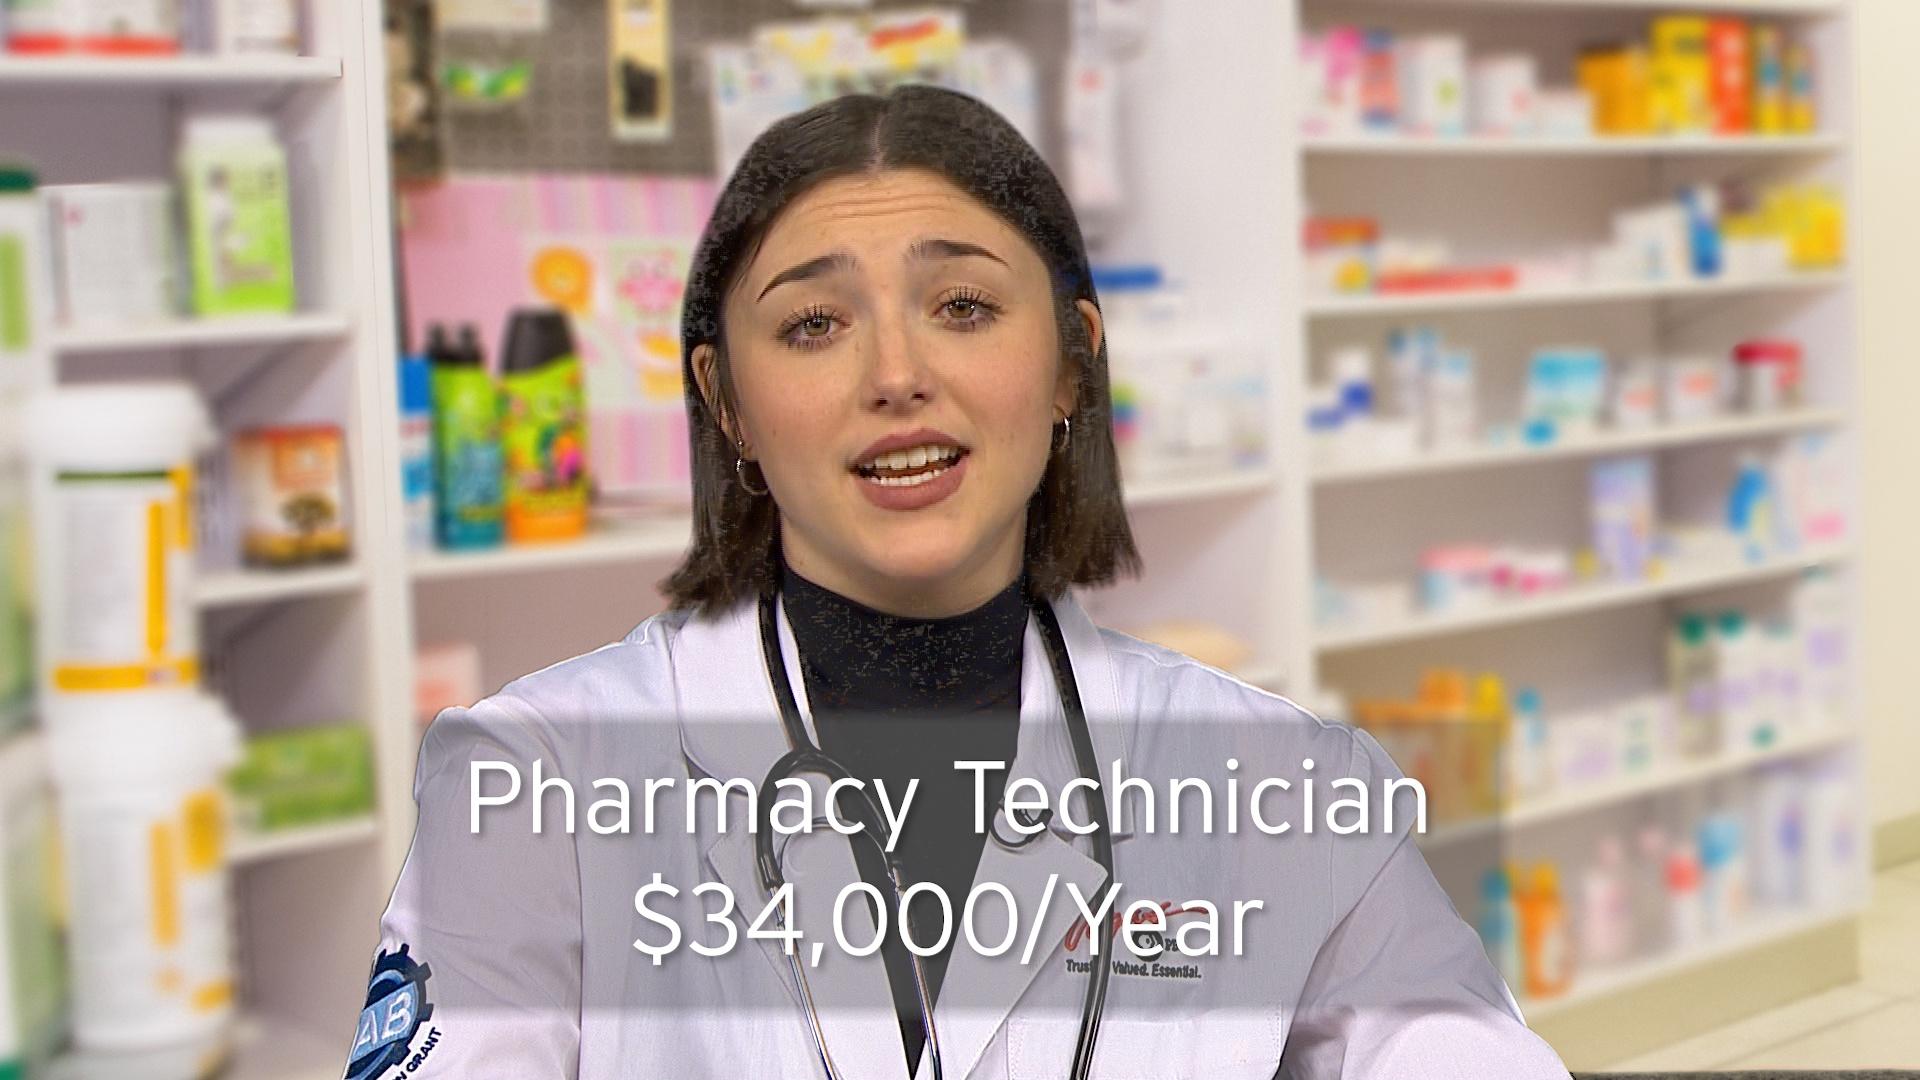 Career Pathway Video for Pharmacy Technician